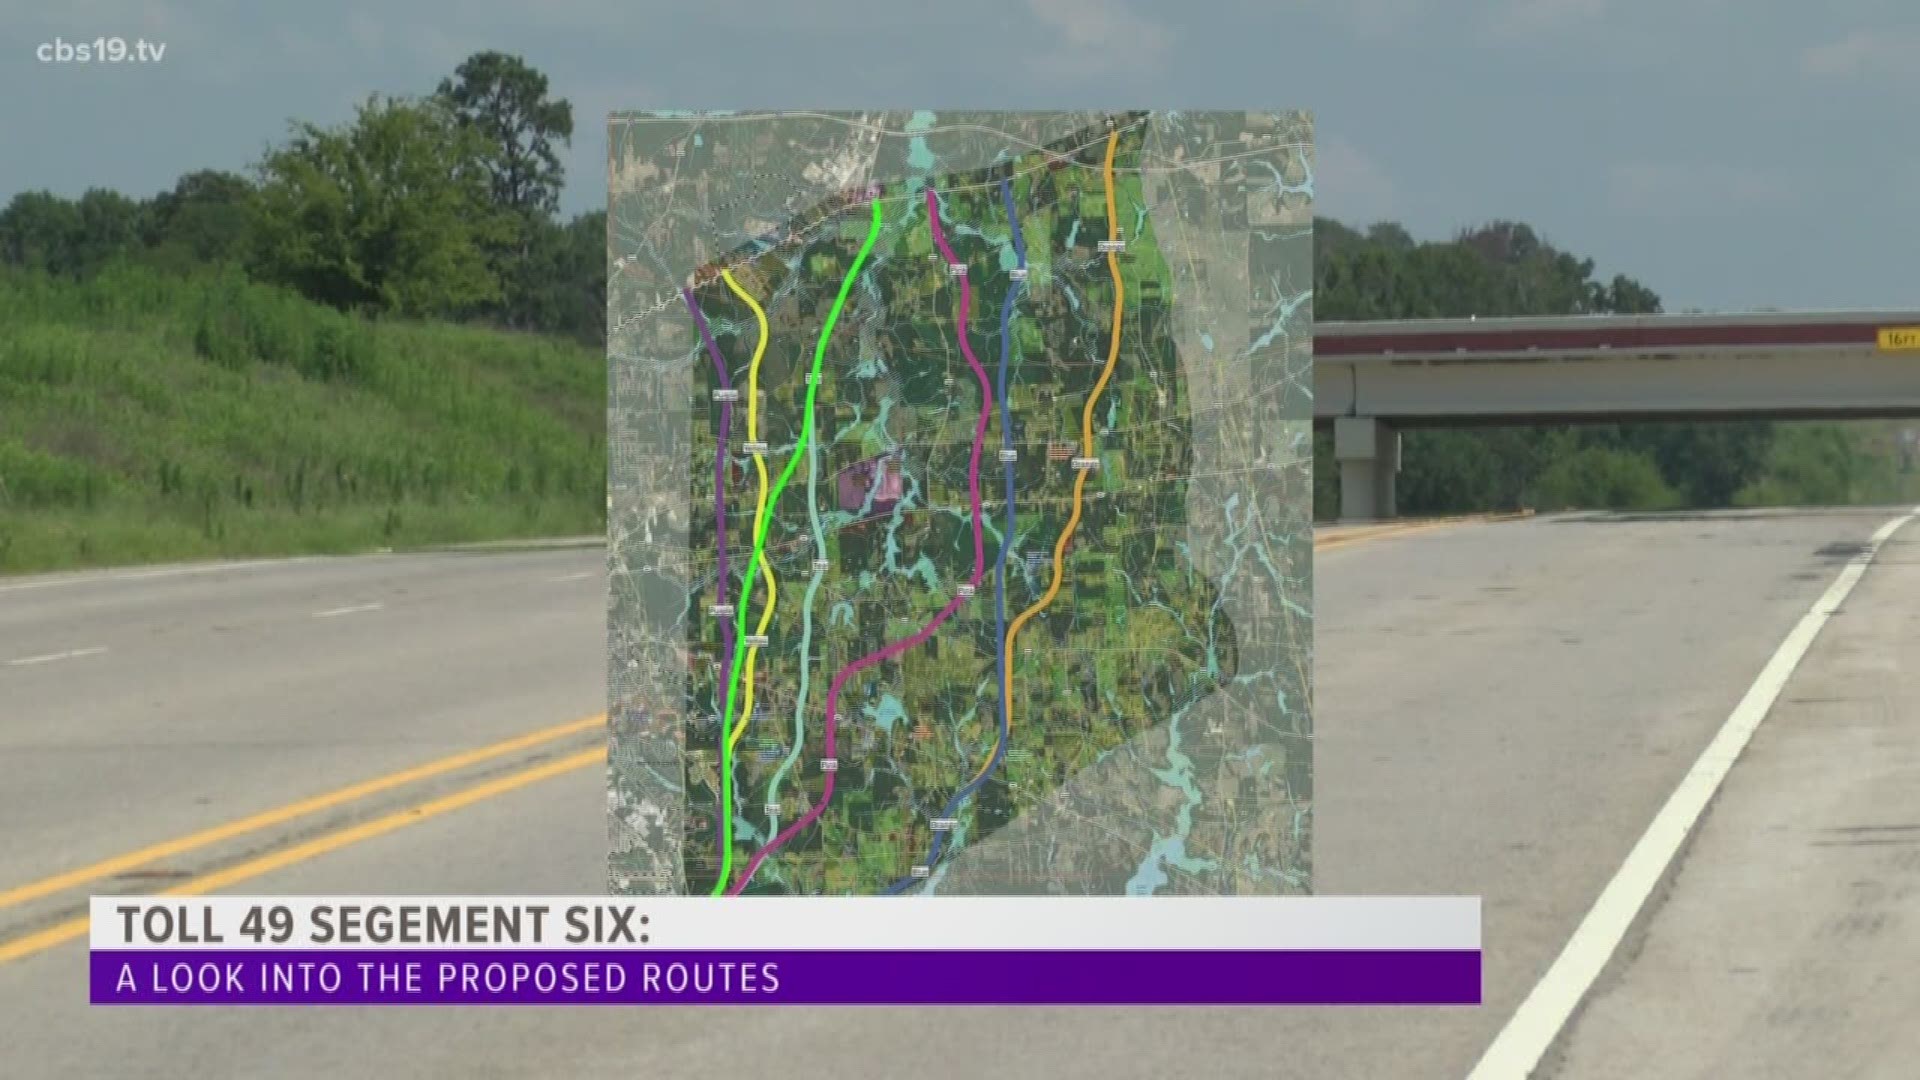 The goal of extending Toll 49 is to create a direct path from Highway 110 near Whitehouse to Highway 271 and Interstate 20.